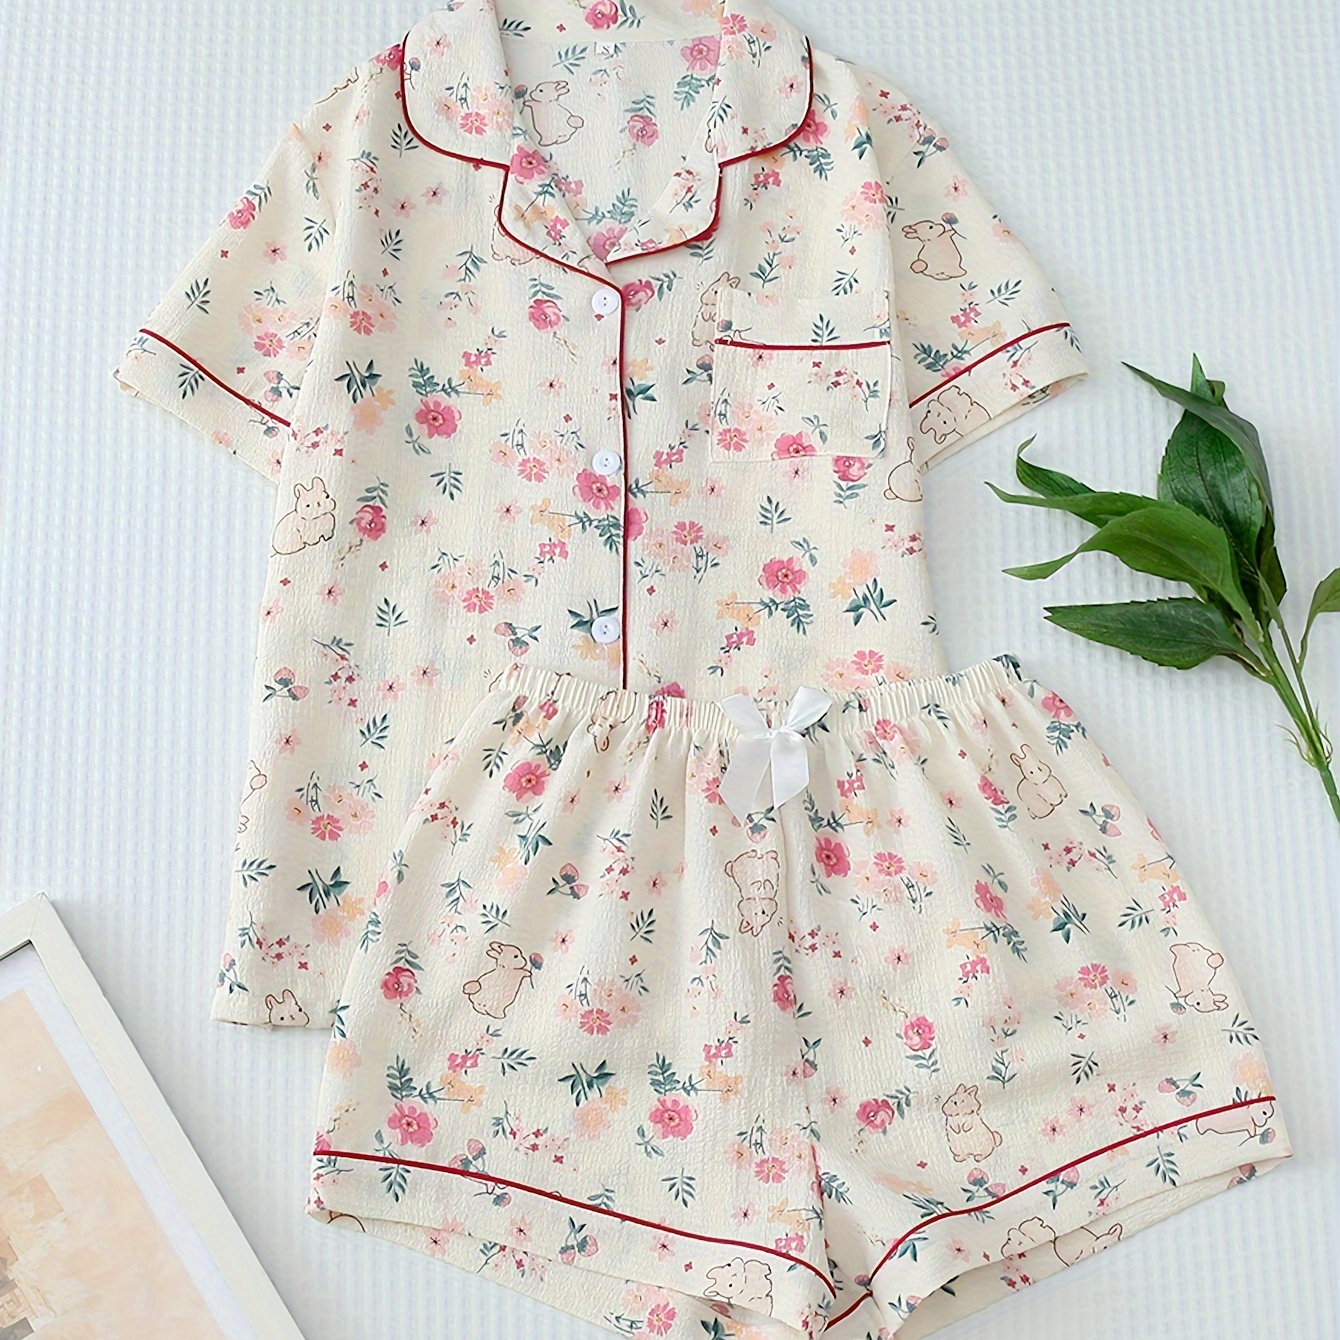 

Women's Cute Bunny & Floral Print Textured Pajama Set, Short Sleeve Buttons Lapel Top & Shorts, Comfortable Relaxed Fit